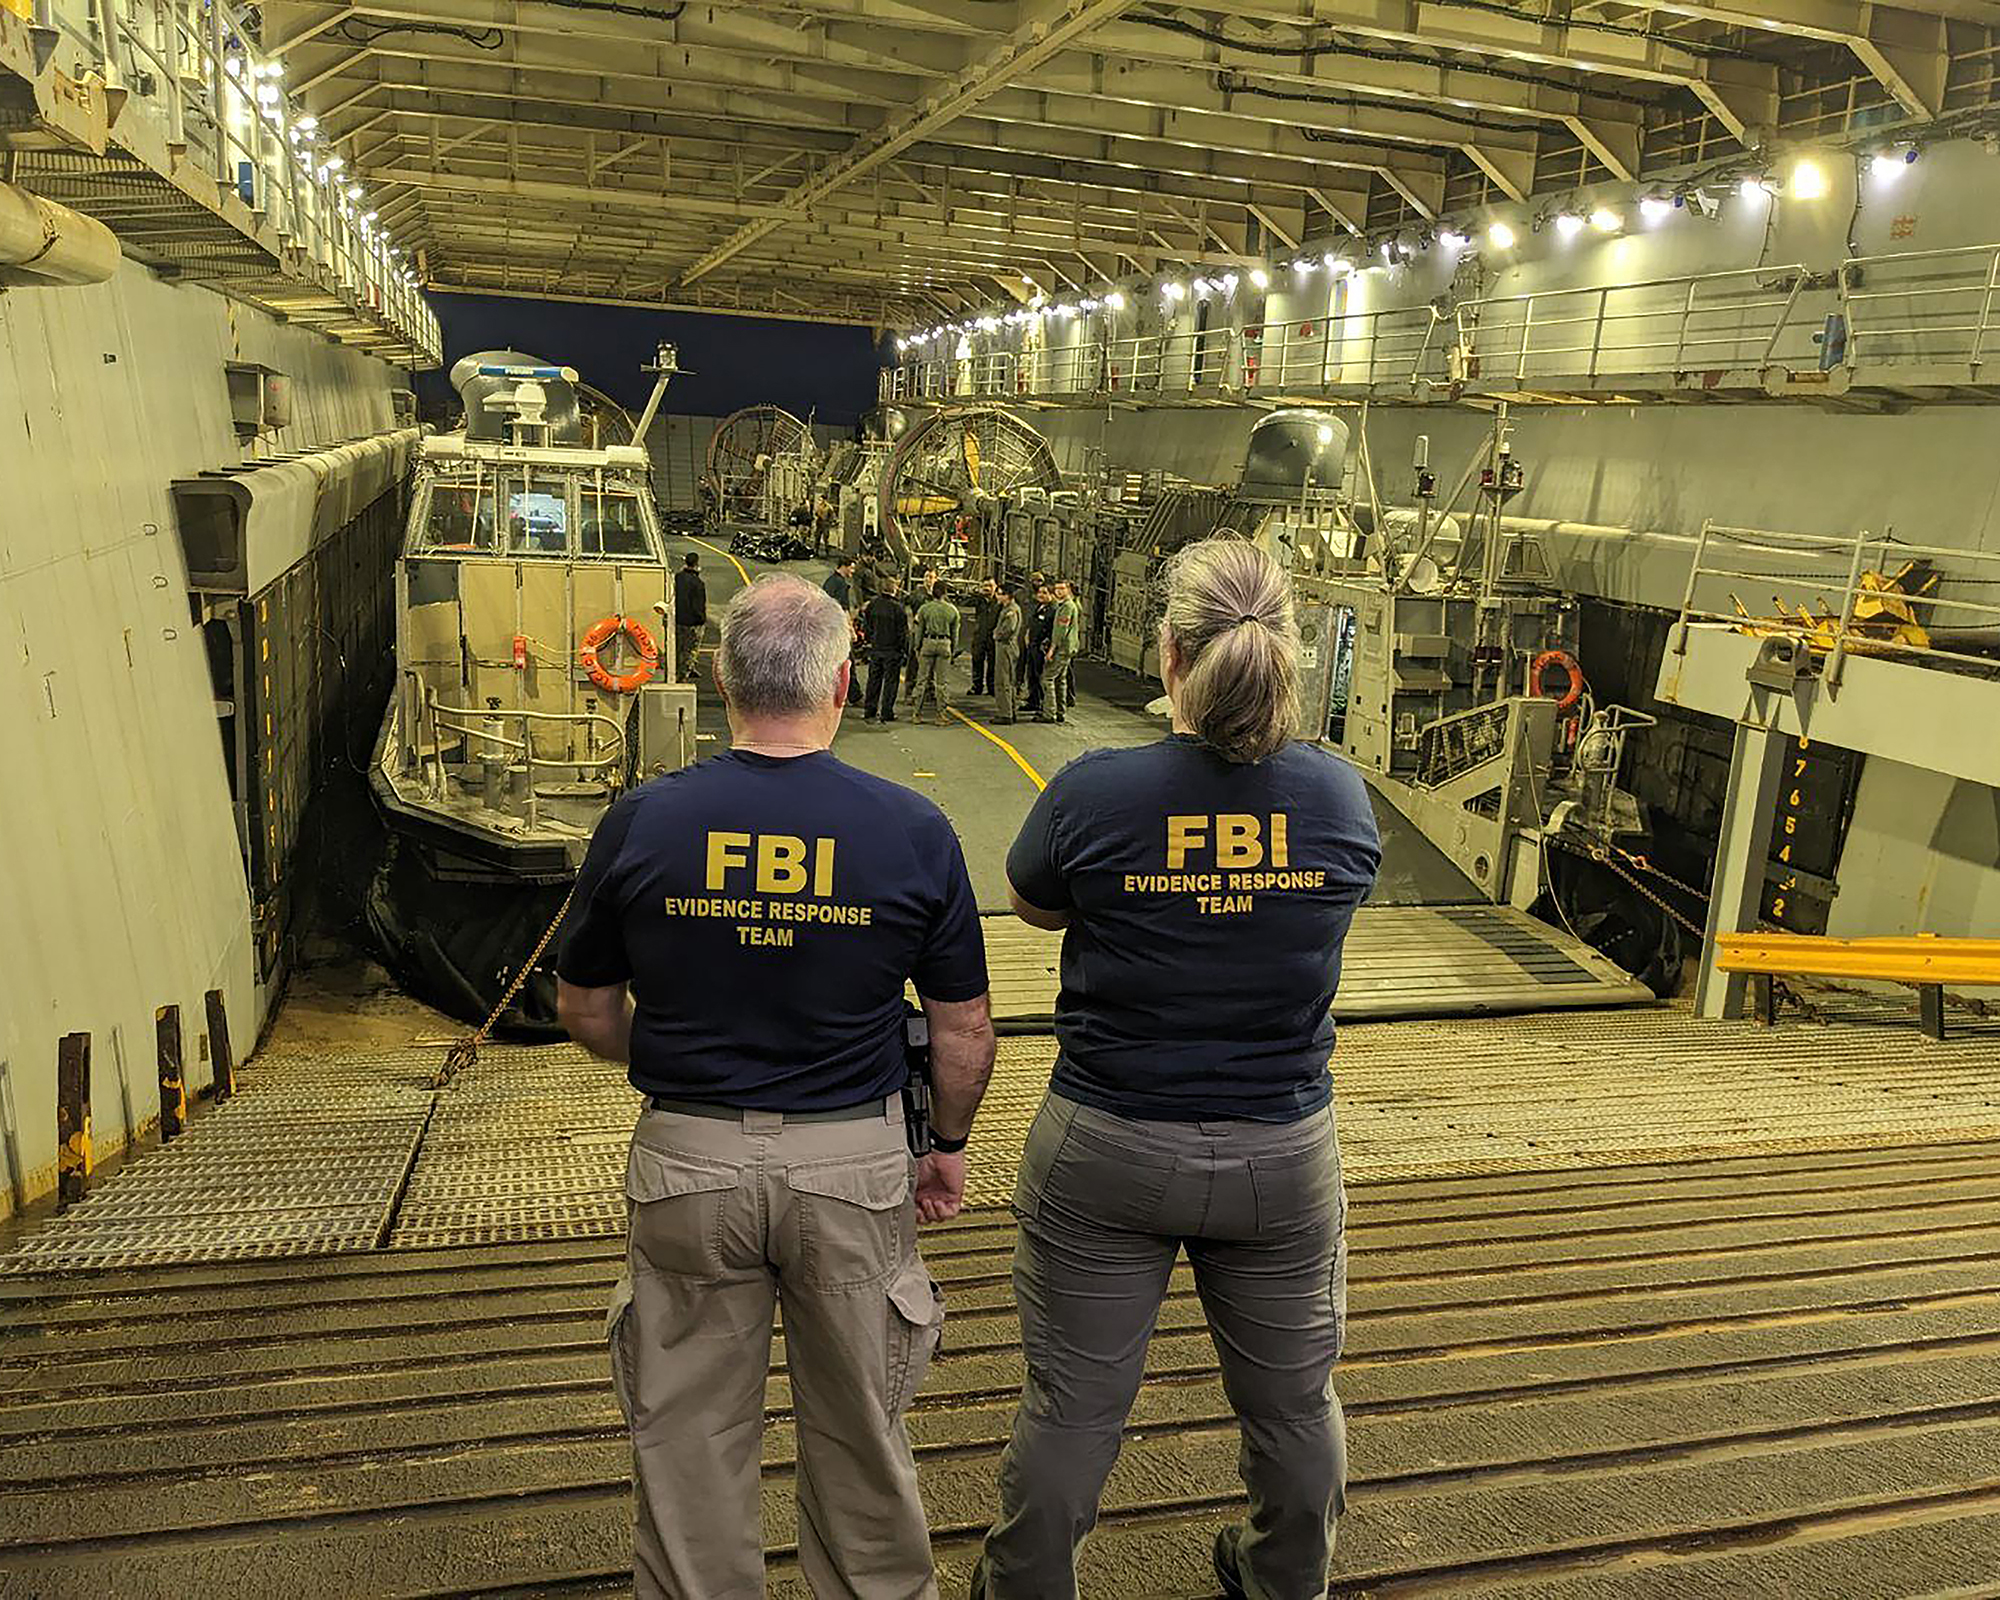 FBI Evidence Response Team Members aboard a Department of Defense vessel assigned to recover efforts off the coast of South Carolina.